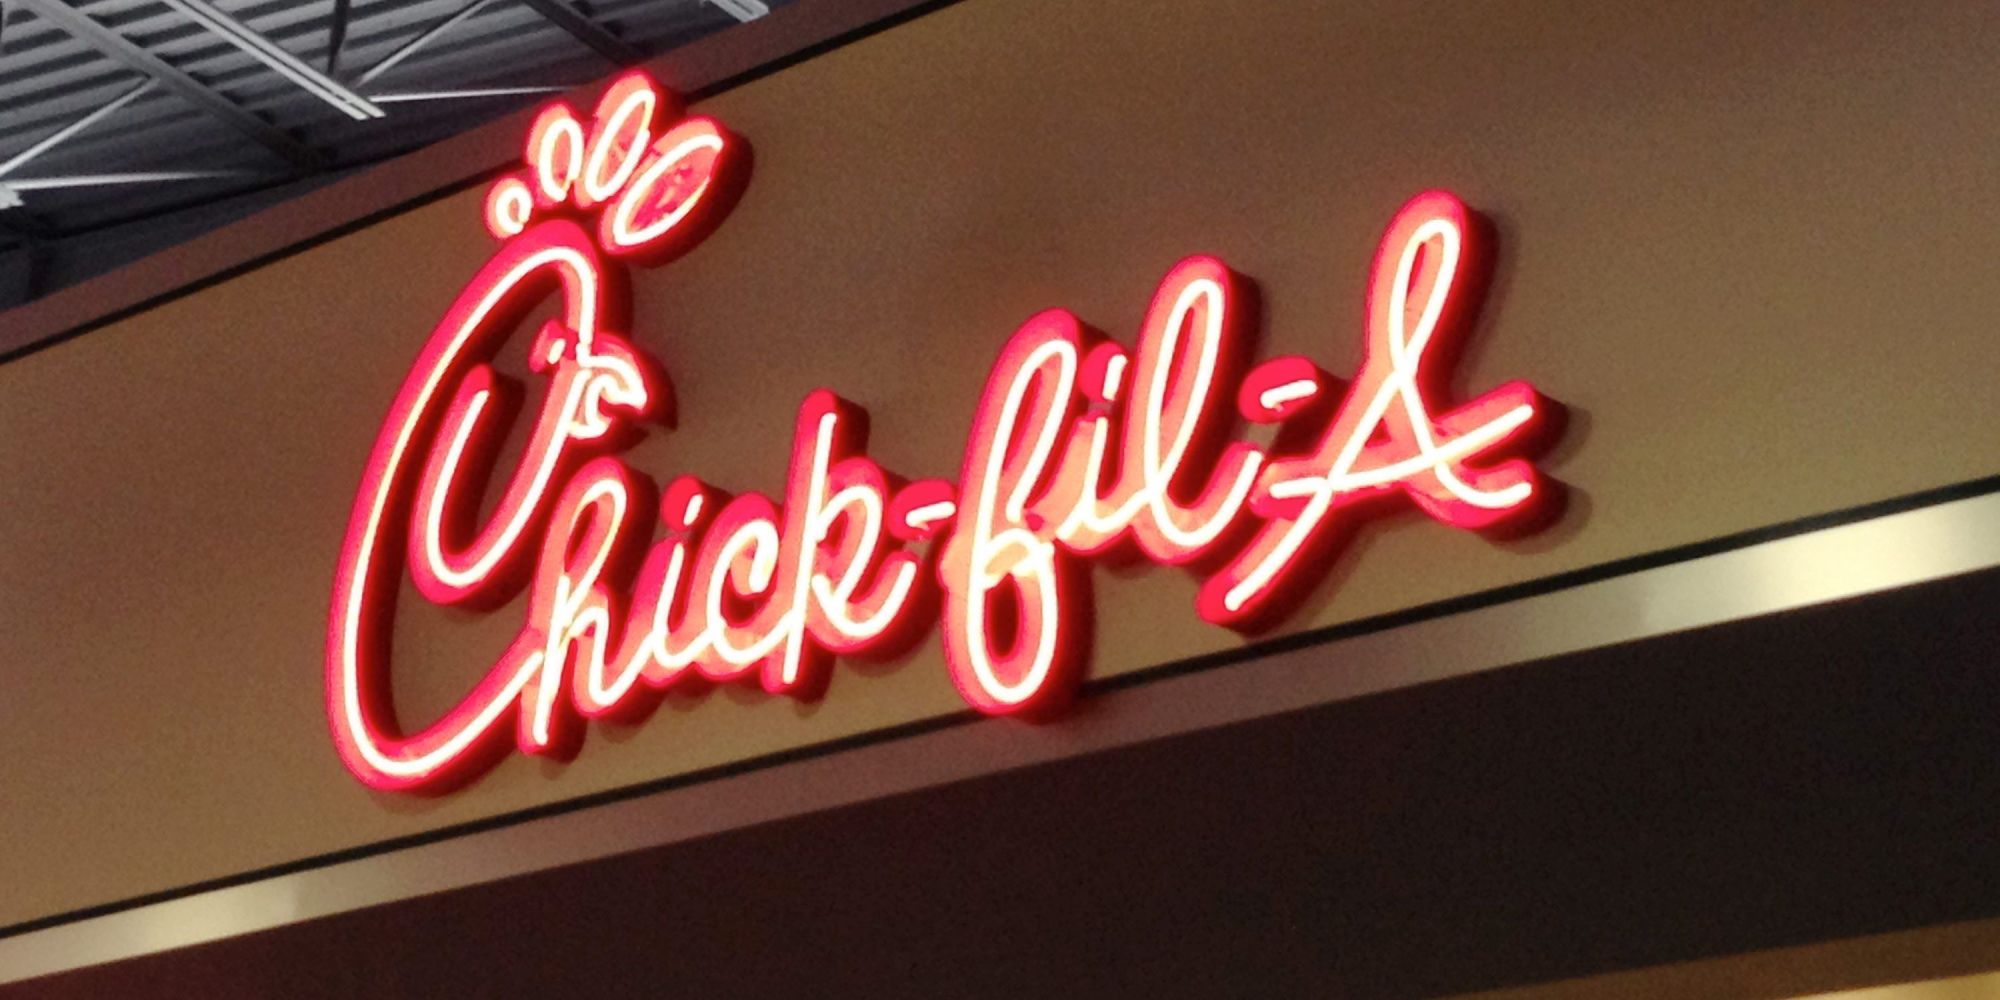 View of the Chick-Fil-A fast food restaurant in the food court of Monmouth Mall in Eatontown, New Jersey